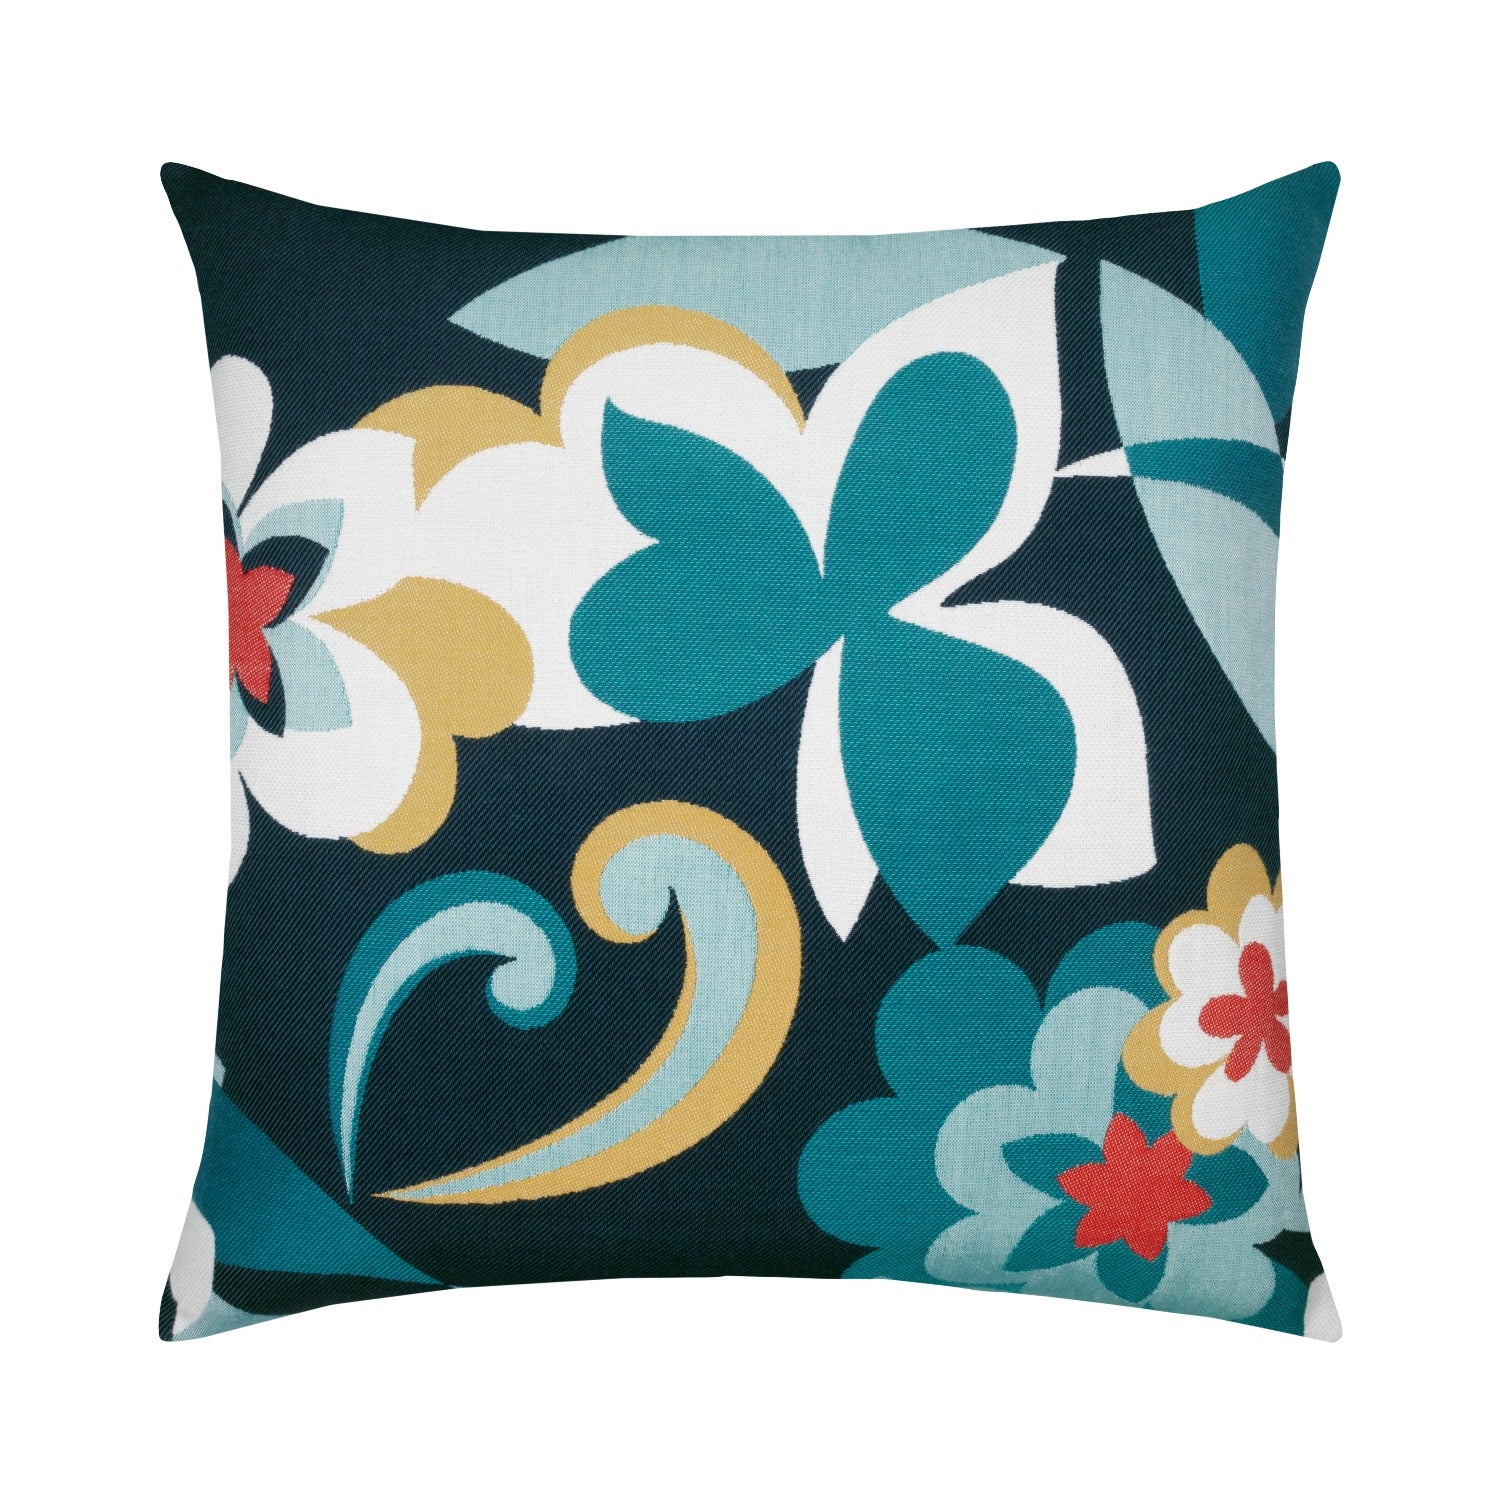 Elaine Smith Floral Impact 22 inch Square Pillow 12030995